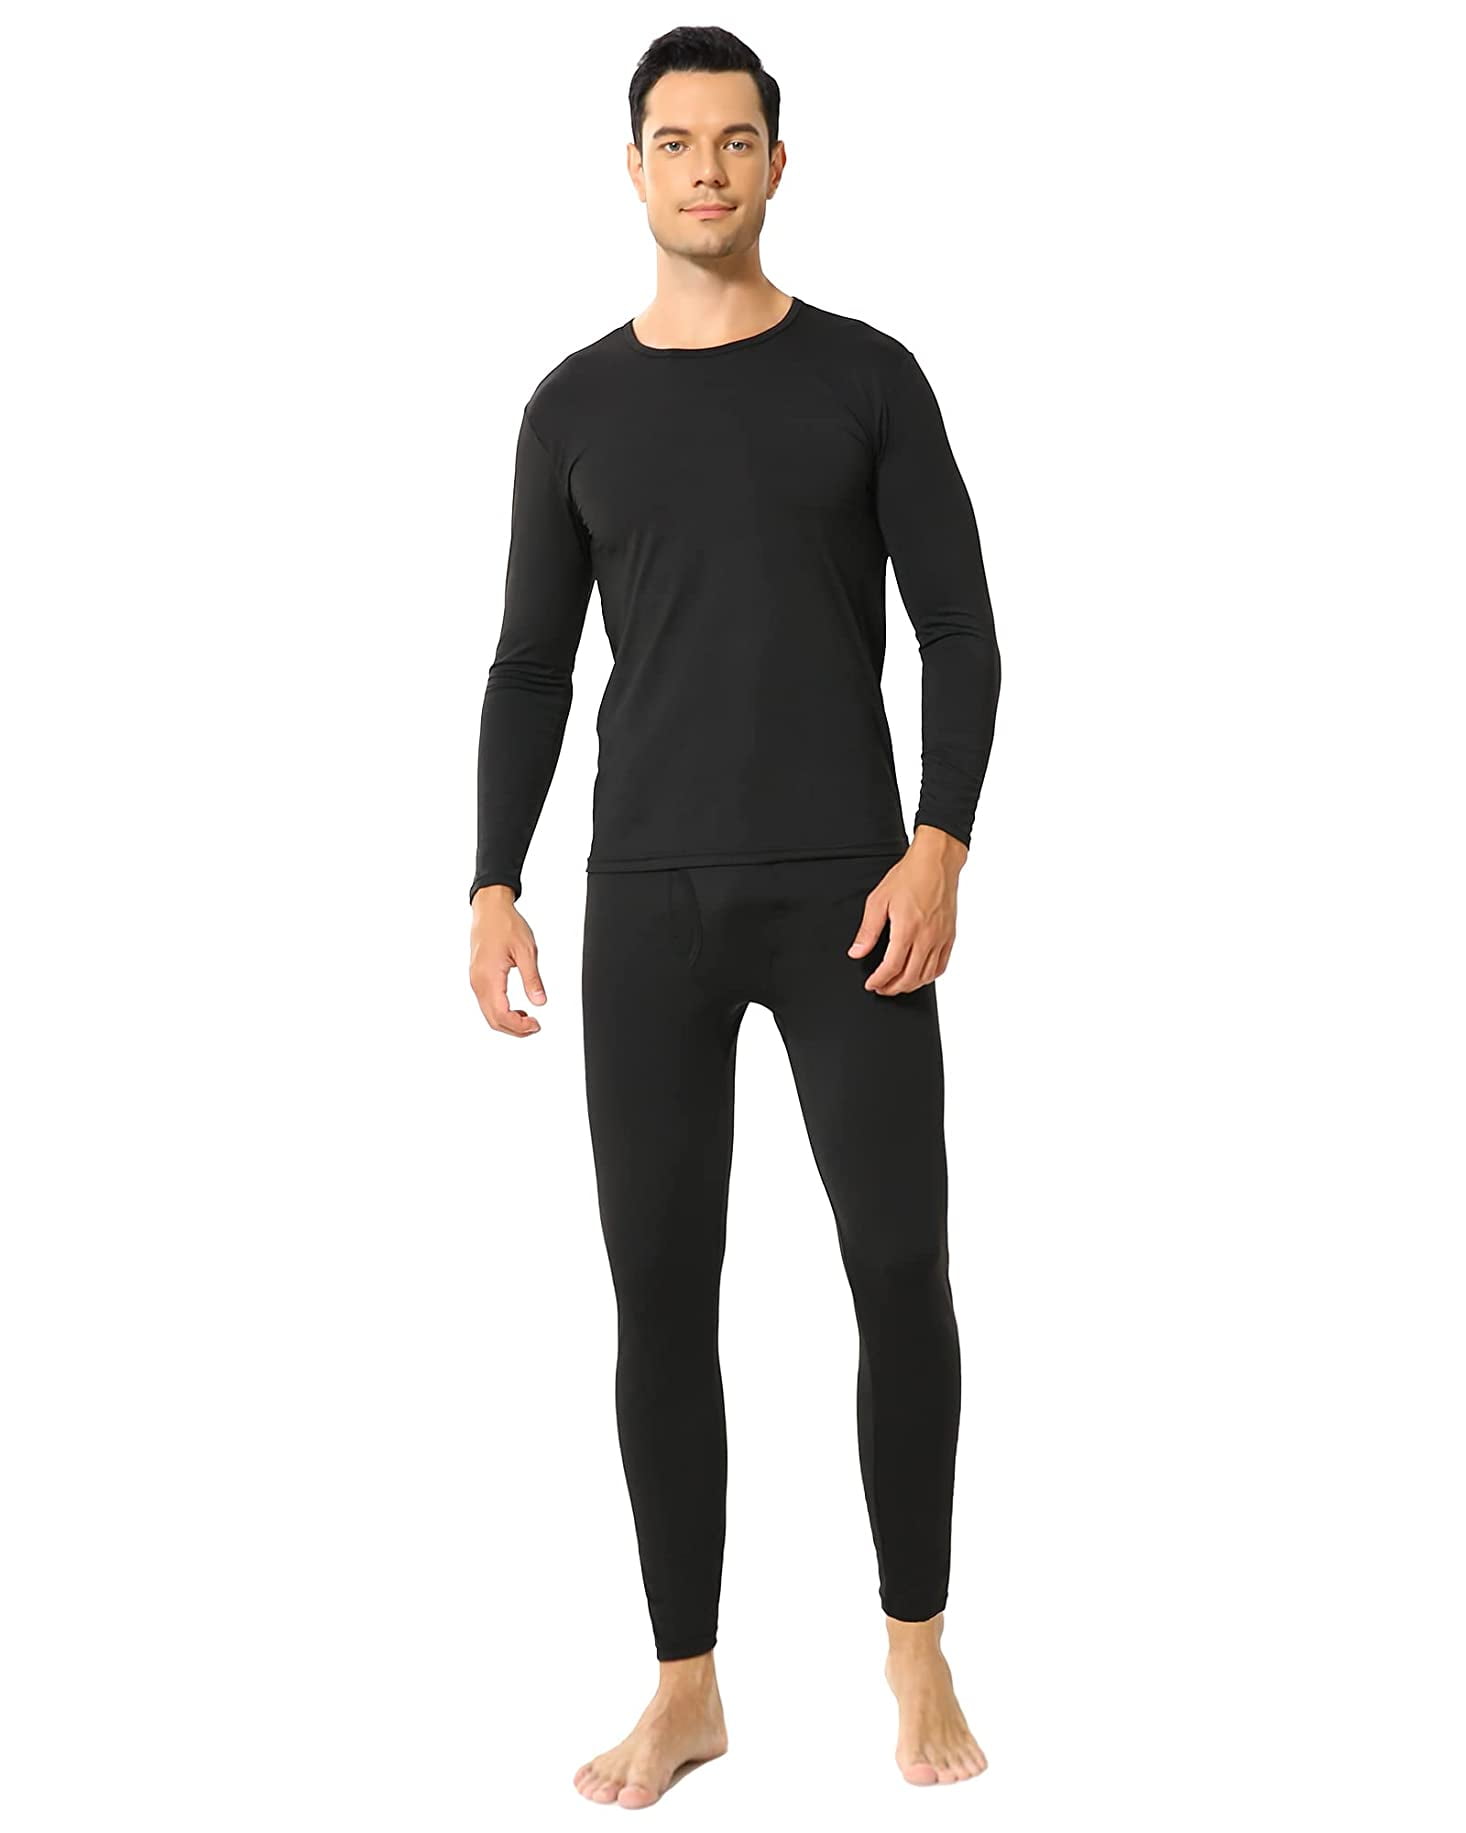 Mens Thermal Underwear For Extreme Cold Hot Sale | bellvalefarms.com